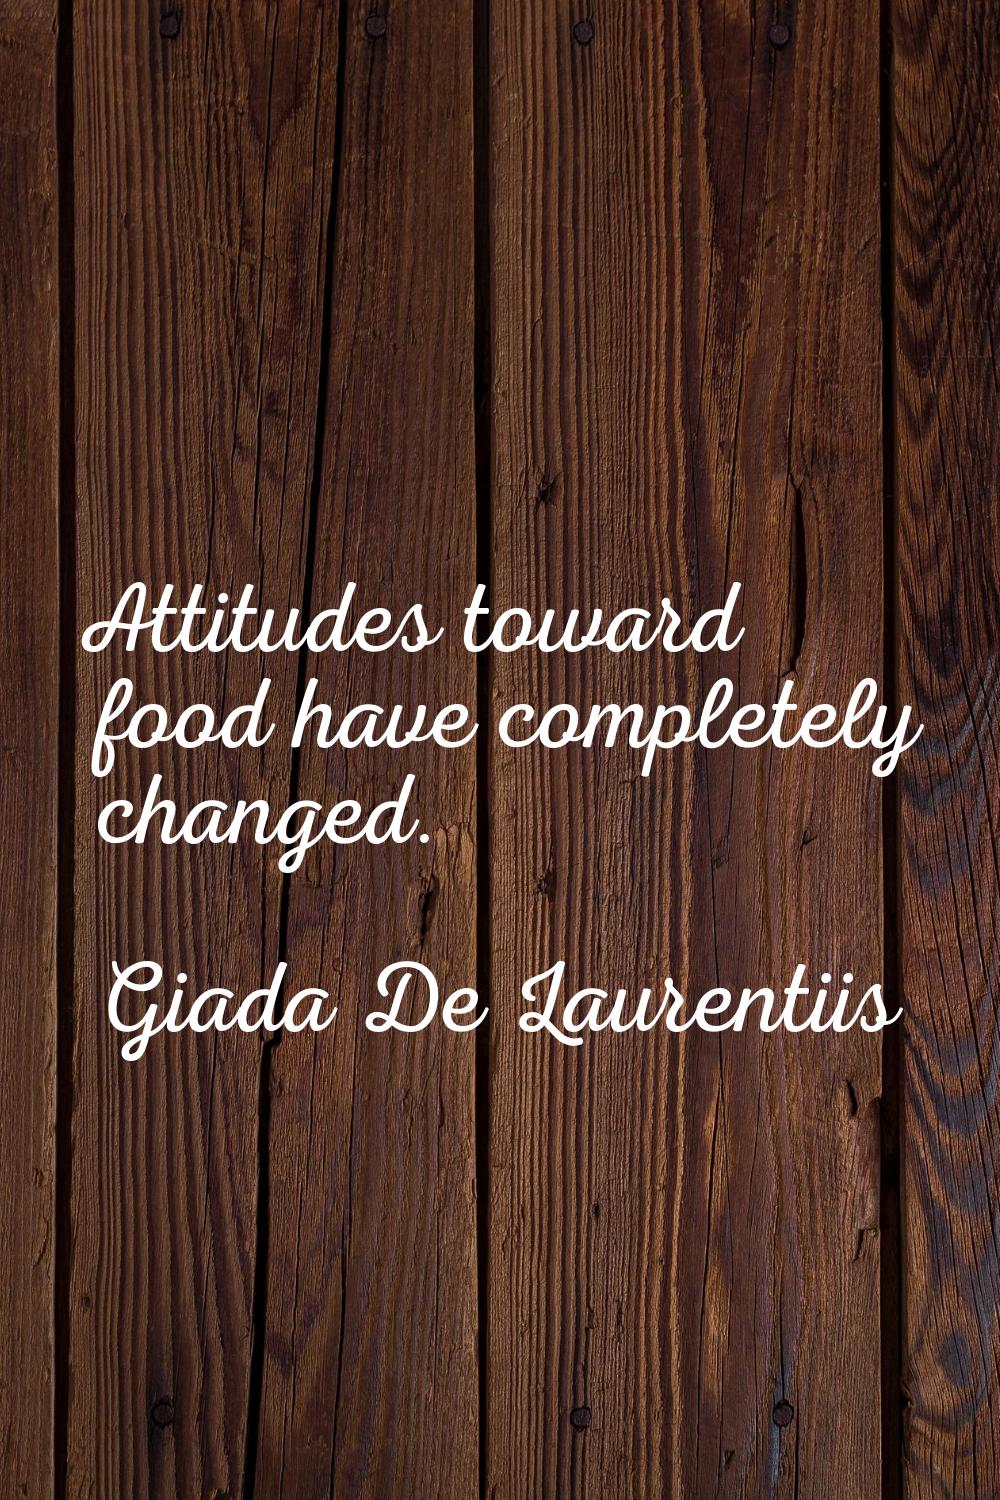 Attitudes toward food have completely changed.